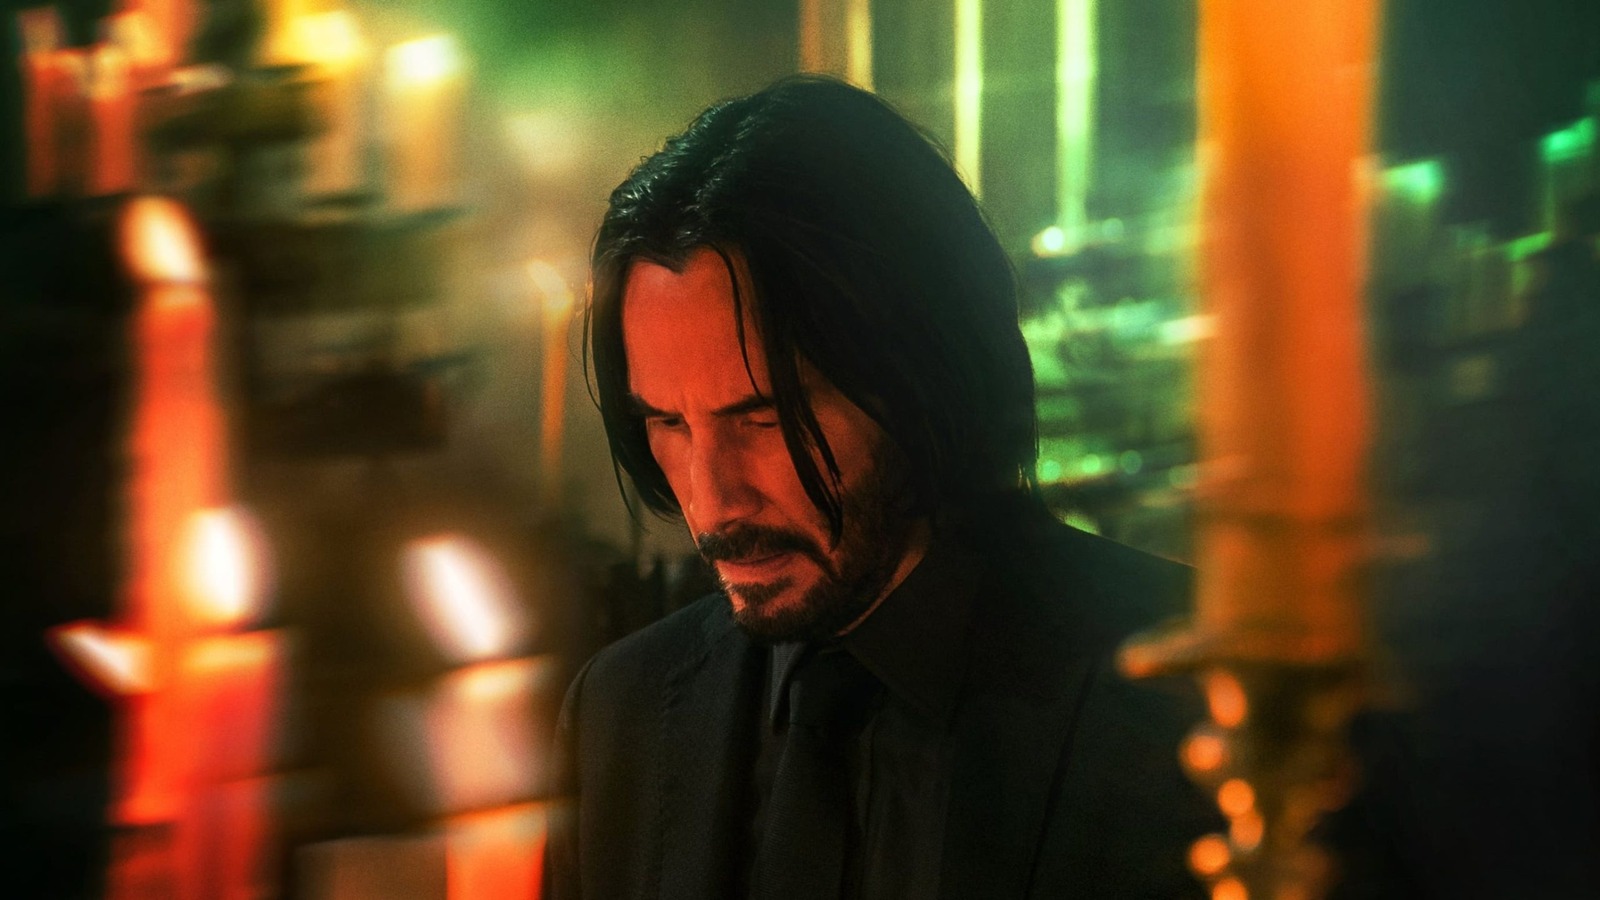 John Wick 4' Trailer Teases Baba Yaga and New Pup as Keanu Reeves Fights  for Freedom Across the Globe